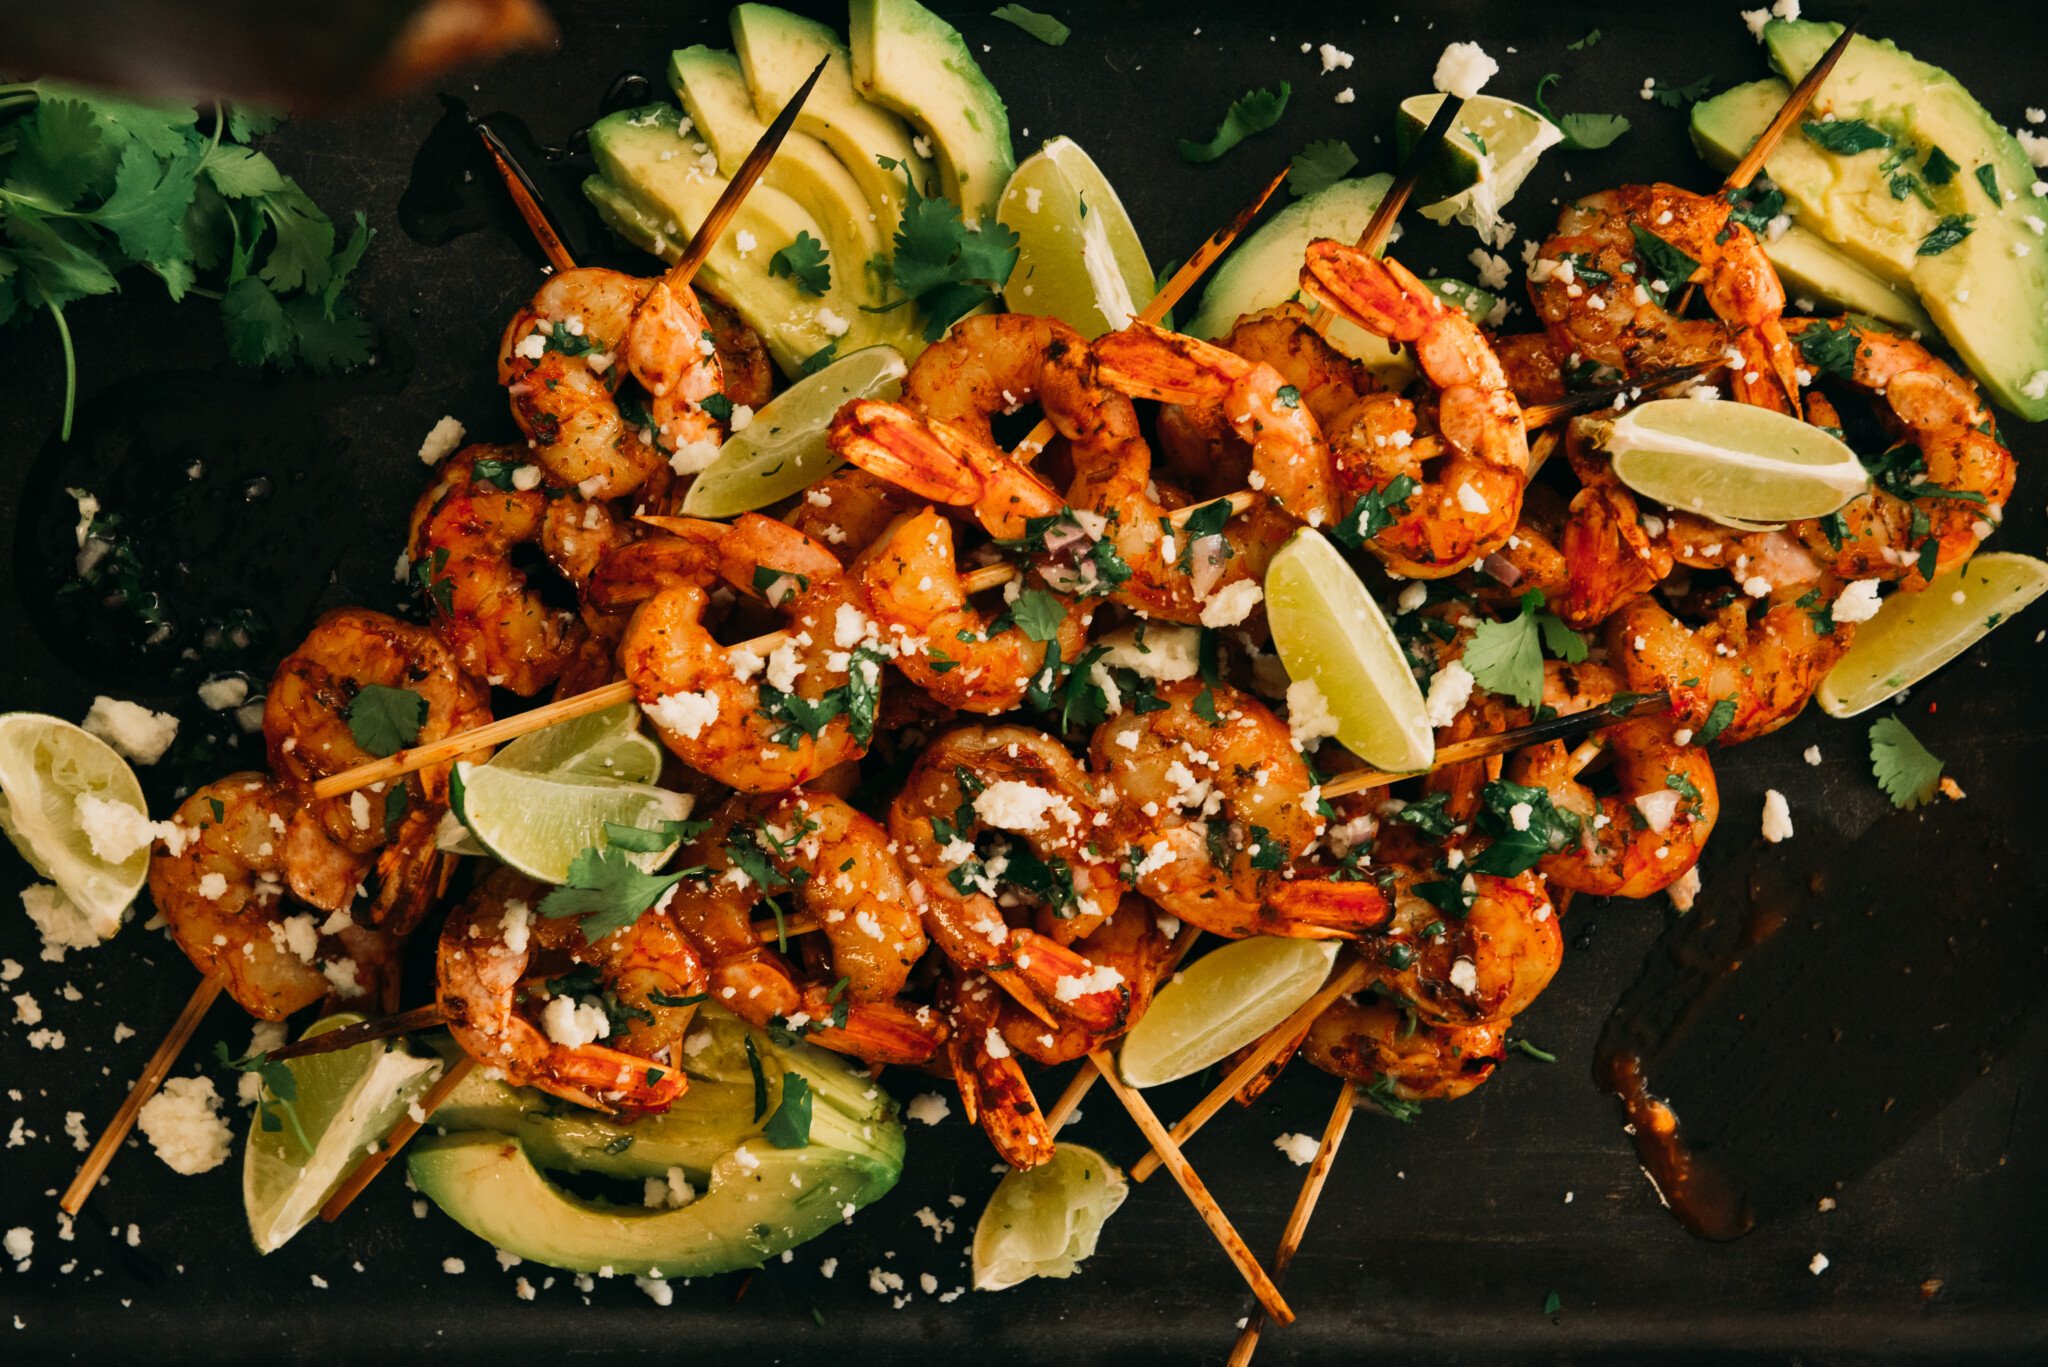 Barbecue shrimp Skewers garnished with lime and cilantro